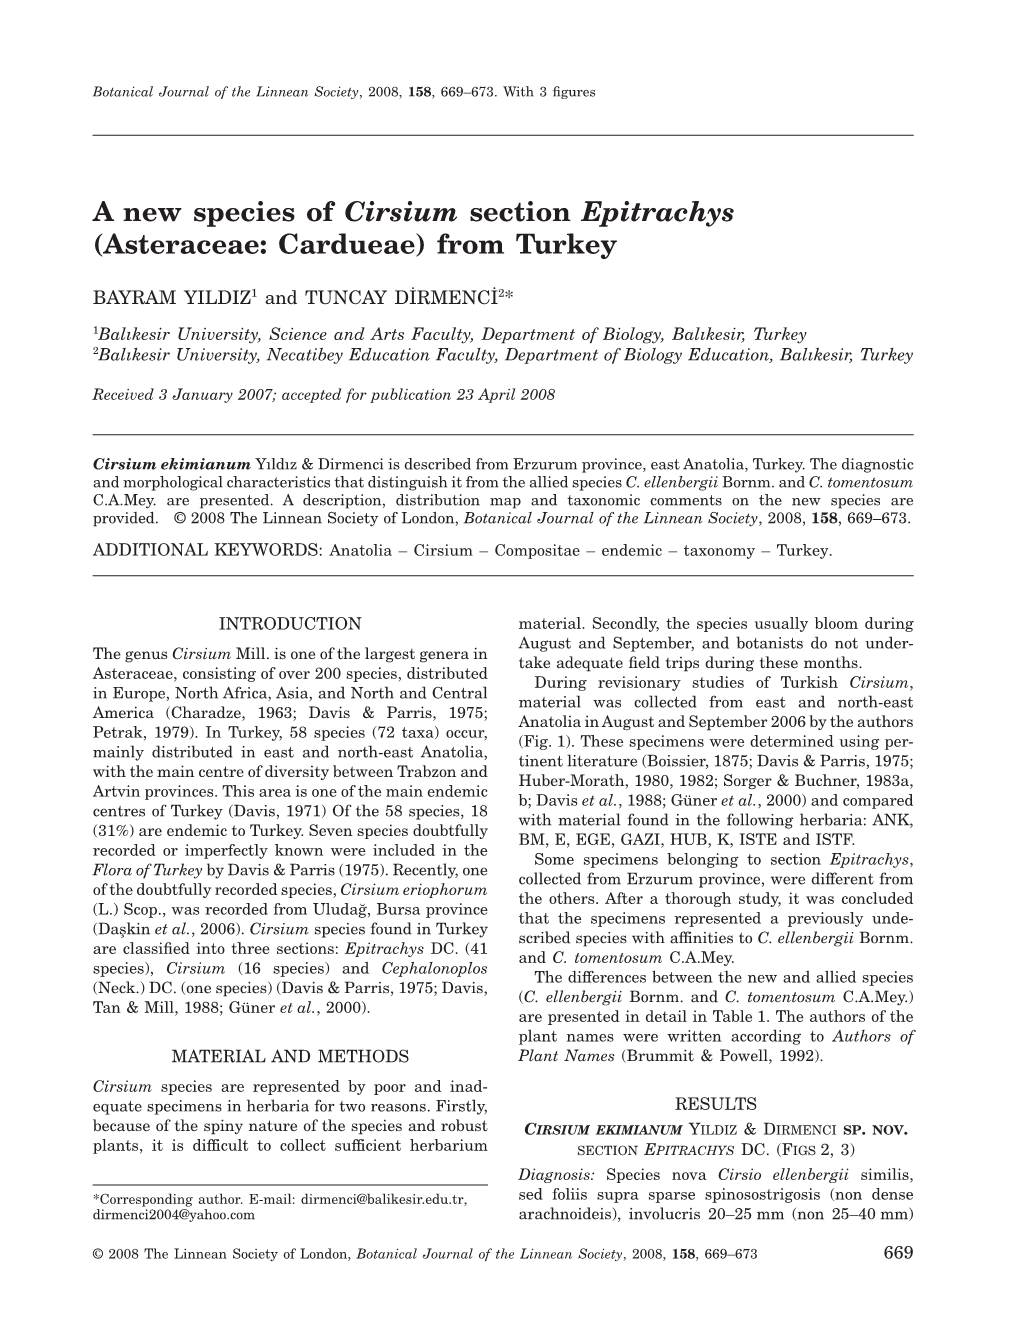 A New Species of Cirsium Section Epitrachys (Asteraceae: Cardueae) from Turkey